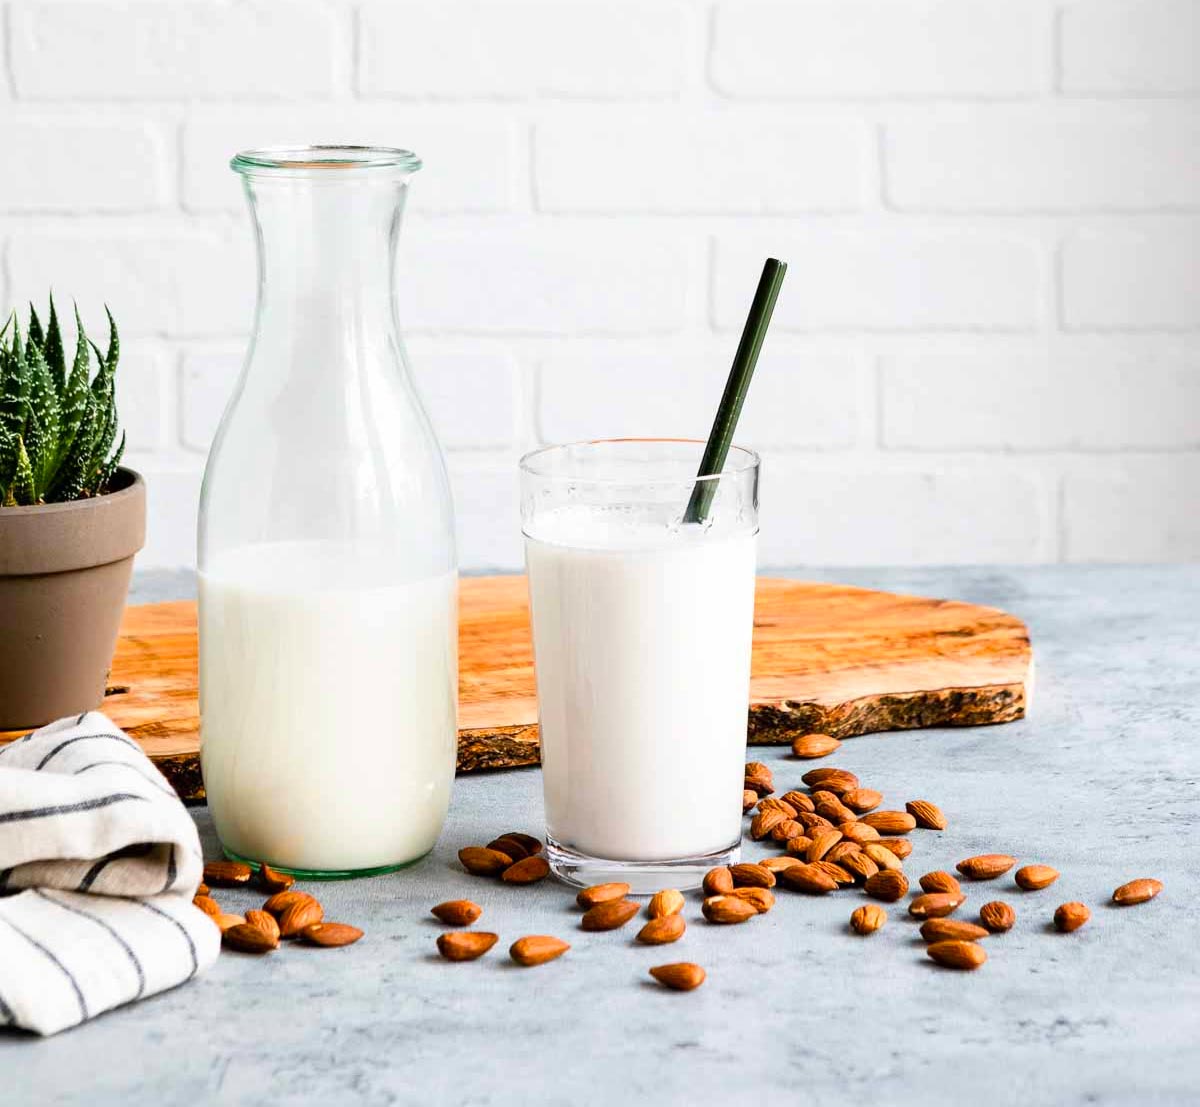 glass jar filled with homemade almond milk next to a glass of almond milk and a green straw.